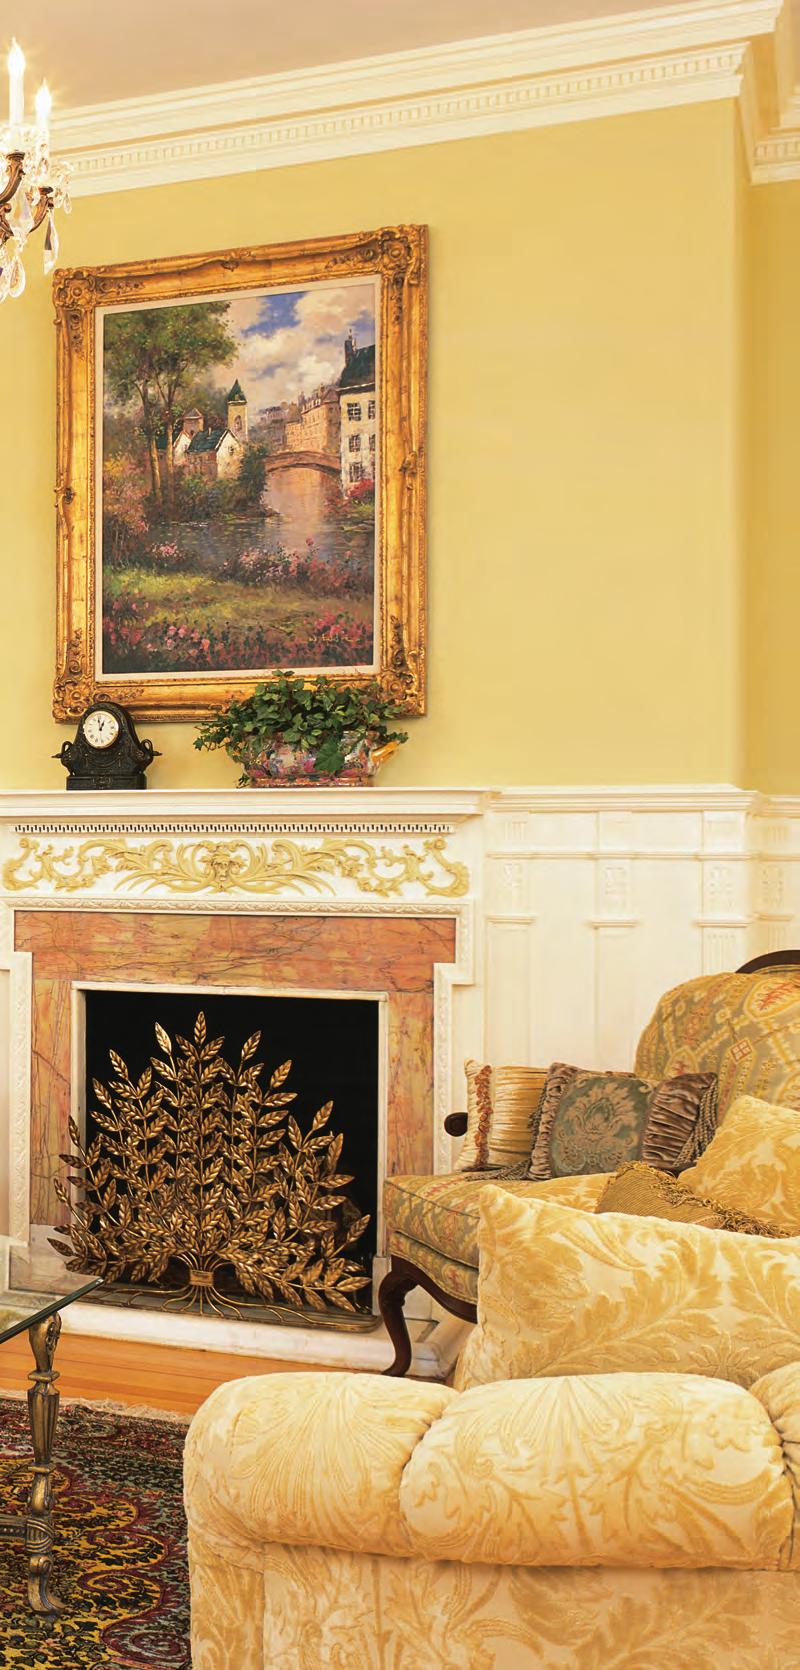 VISUAL FEAST A palate of golden ocher, ginger, and creamy beiges on walls and furniture creates a sophisticated but relaxed atmosphere.